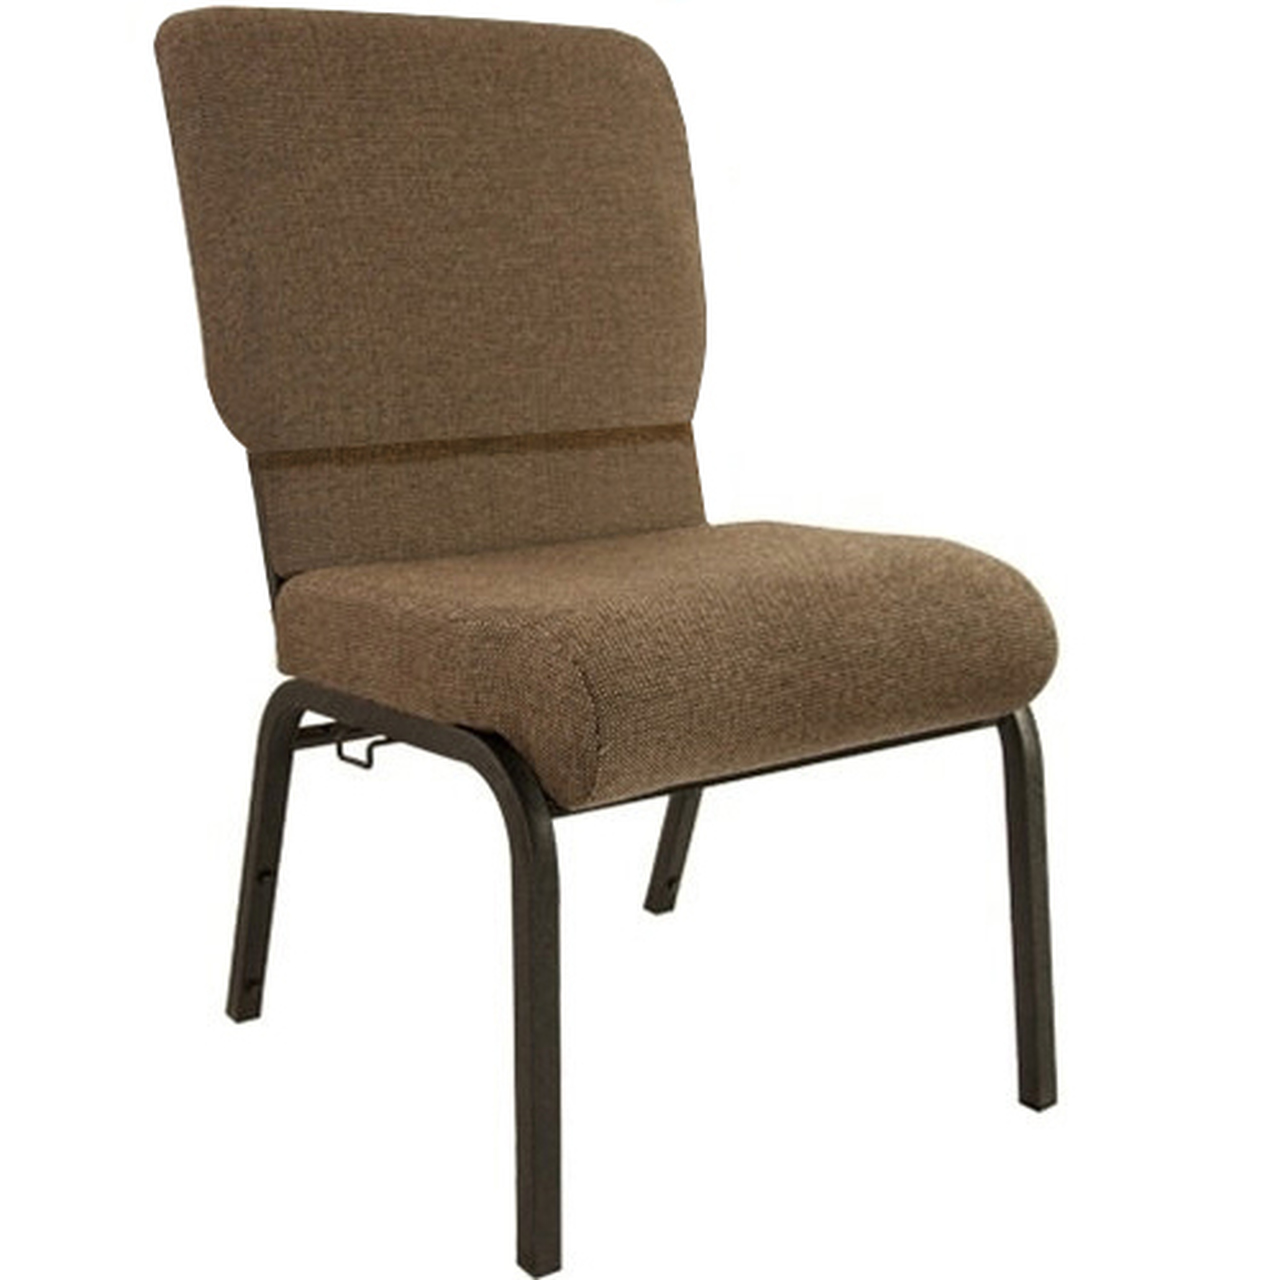 Advantage Church Chairs in popular Jute Fabric are on Sale! (PCHT-112)